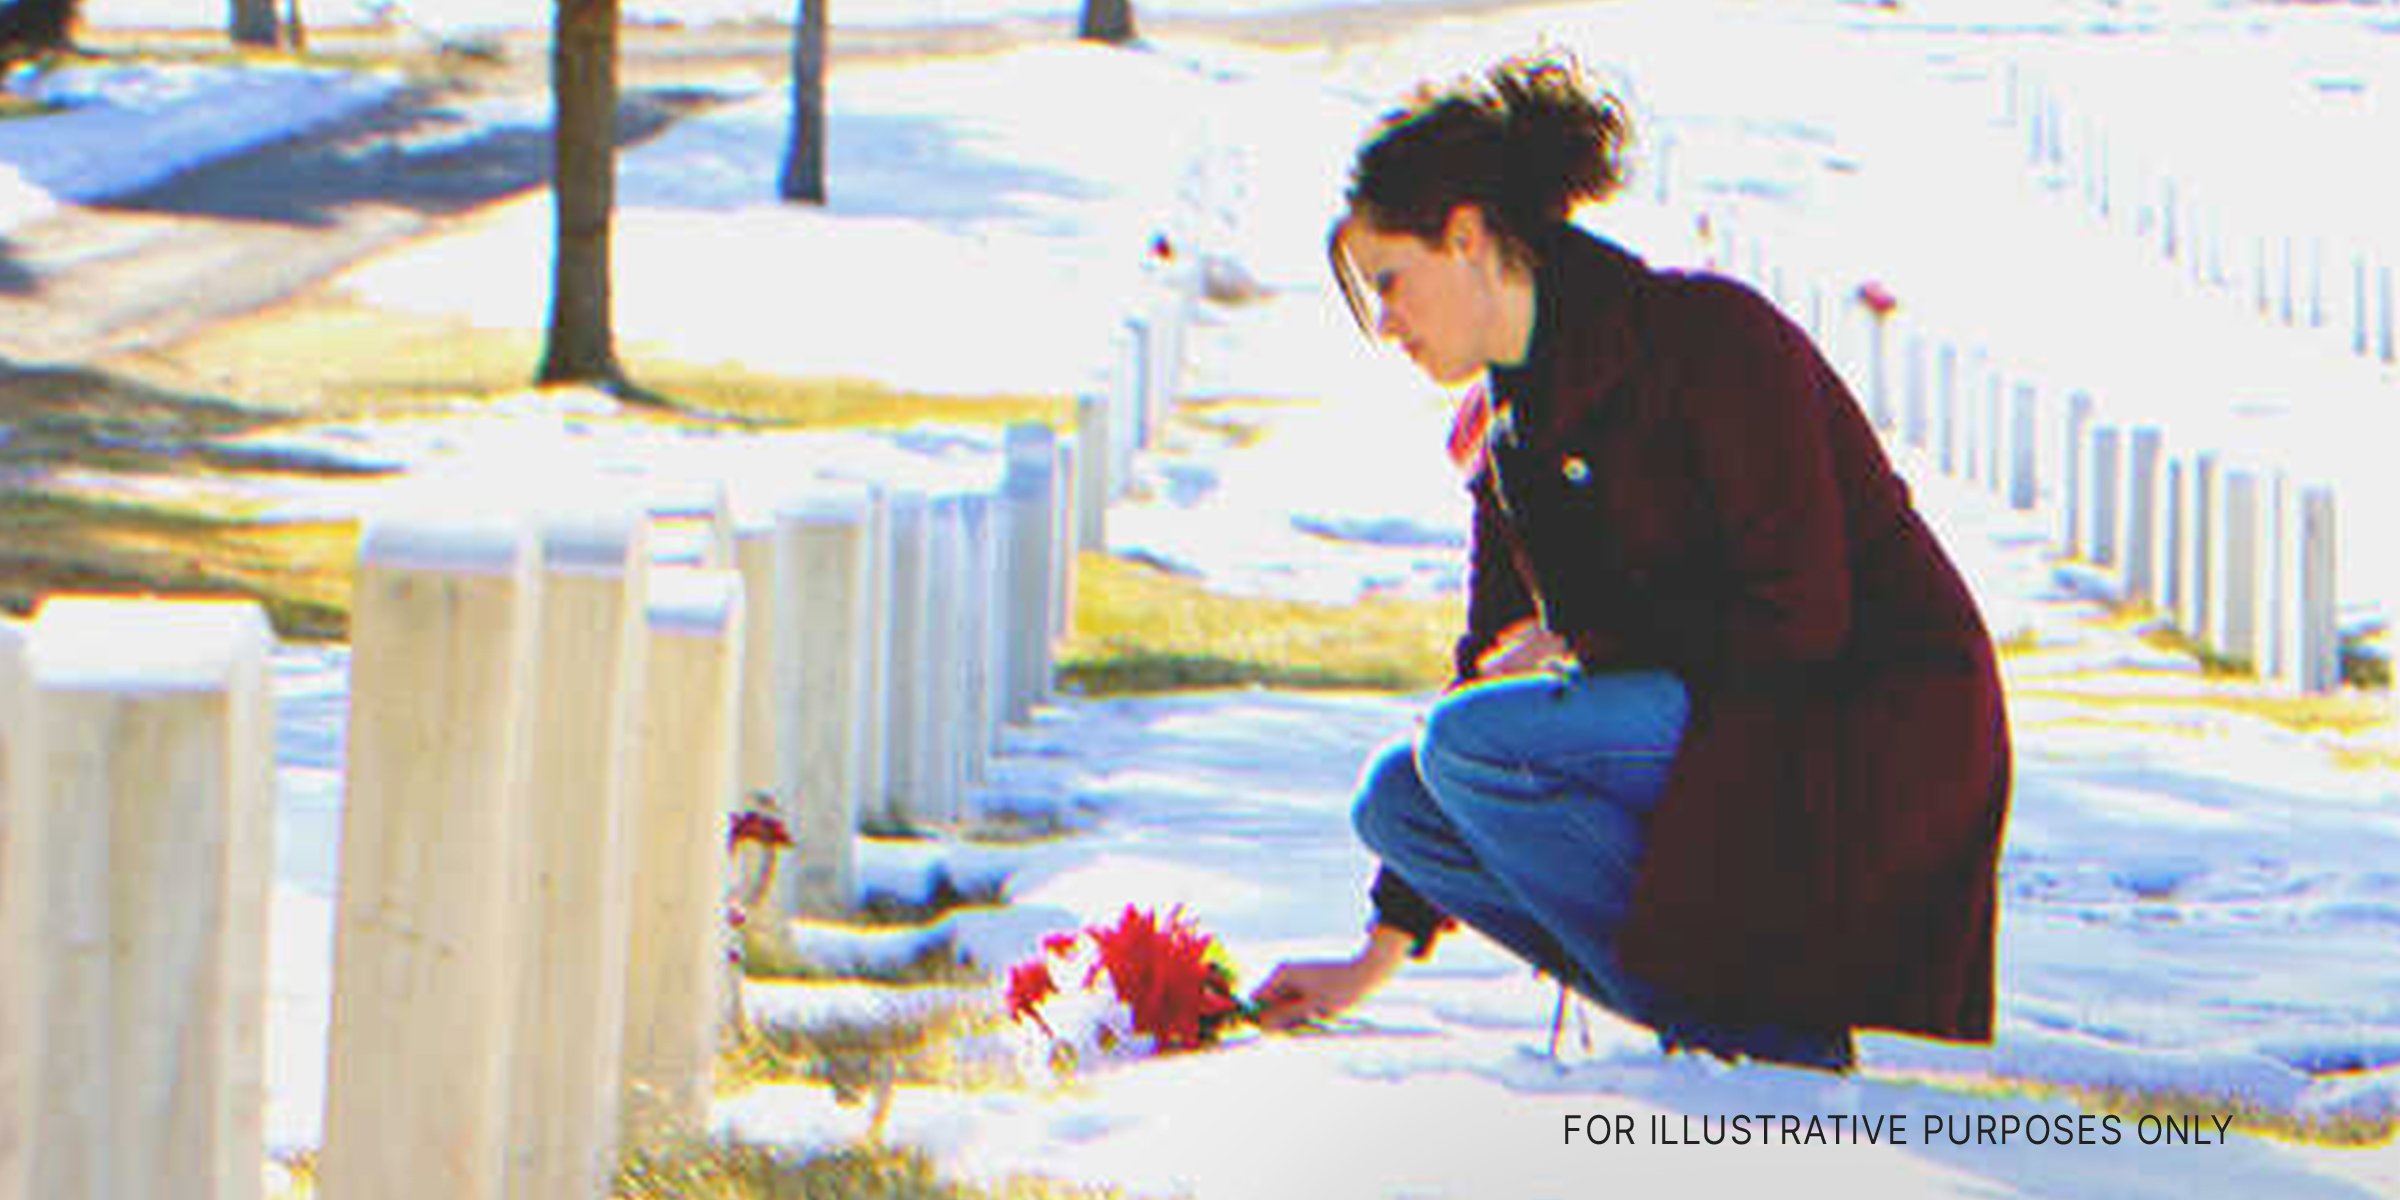 Young Woman Placing Flowers Near A Grave. | Source: Getty Images